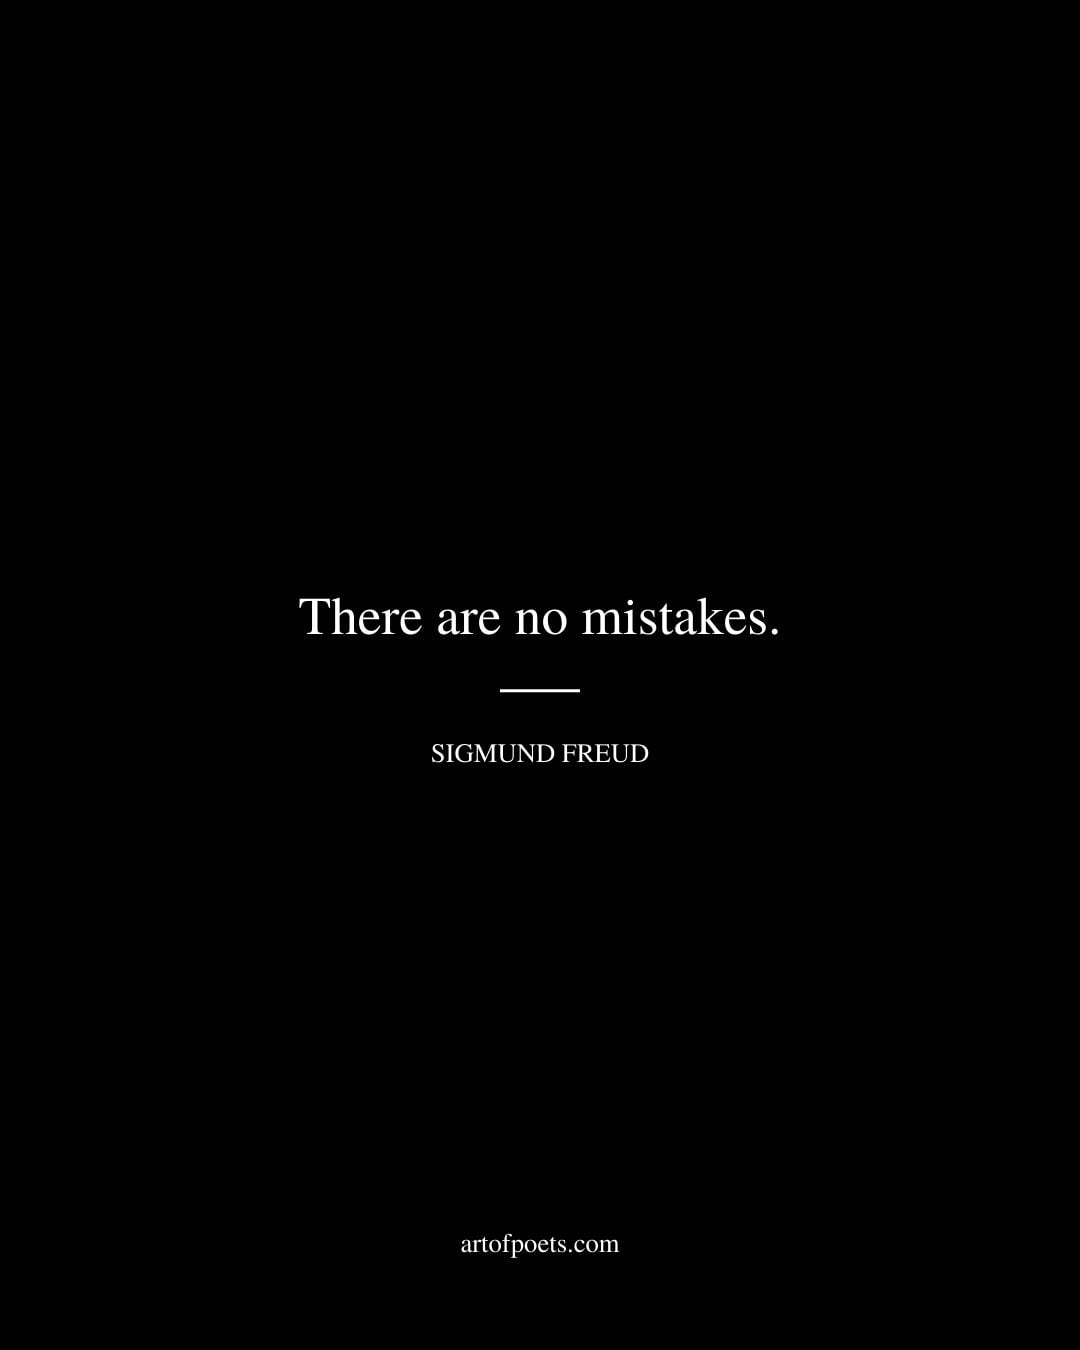 There are no mistakes